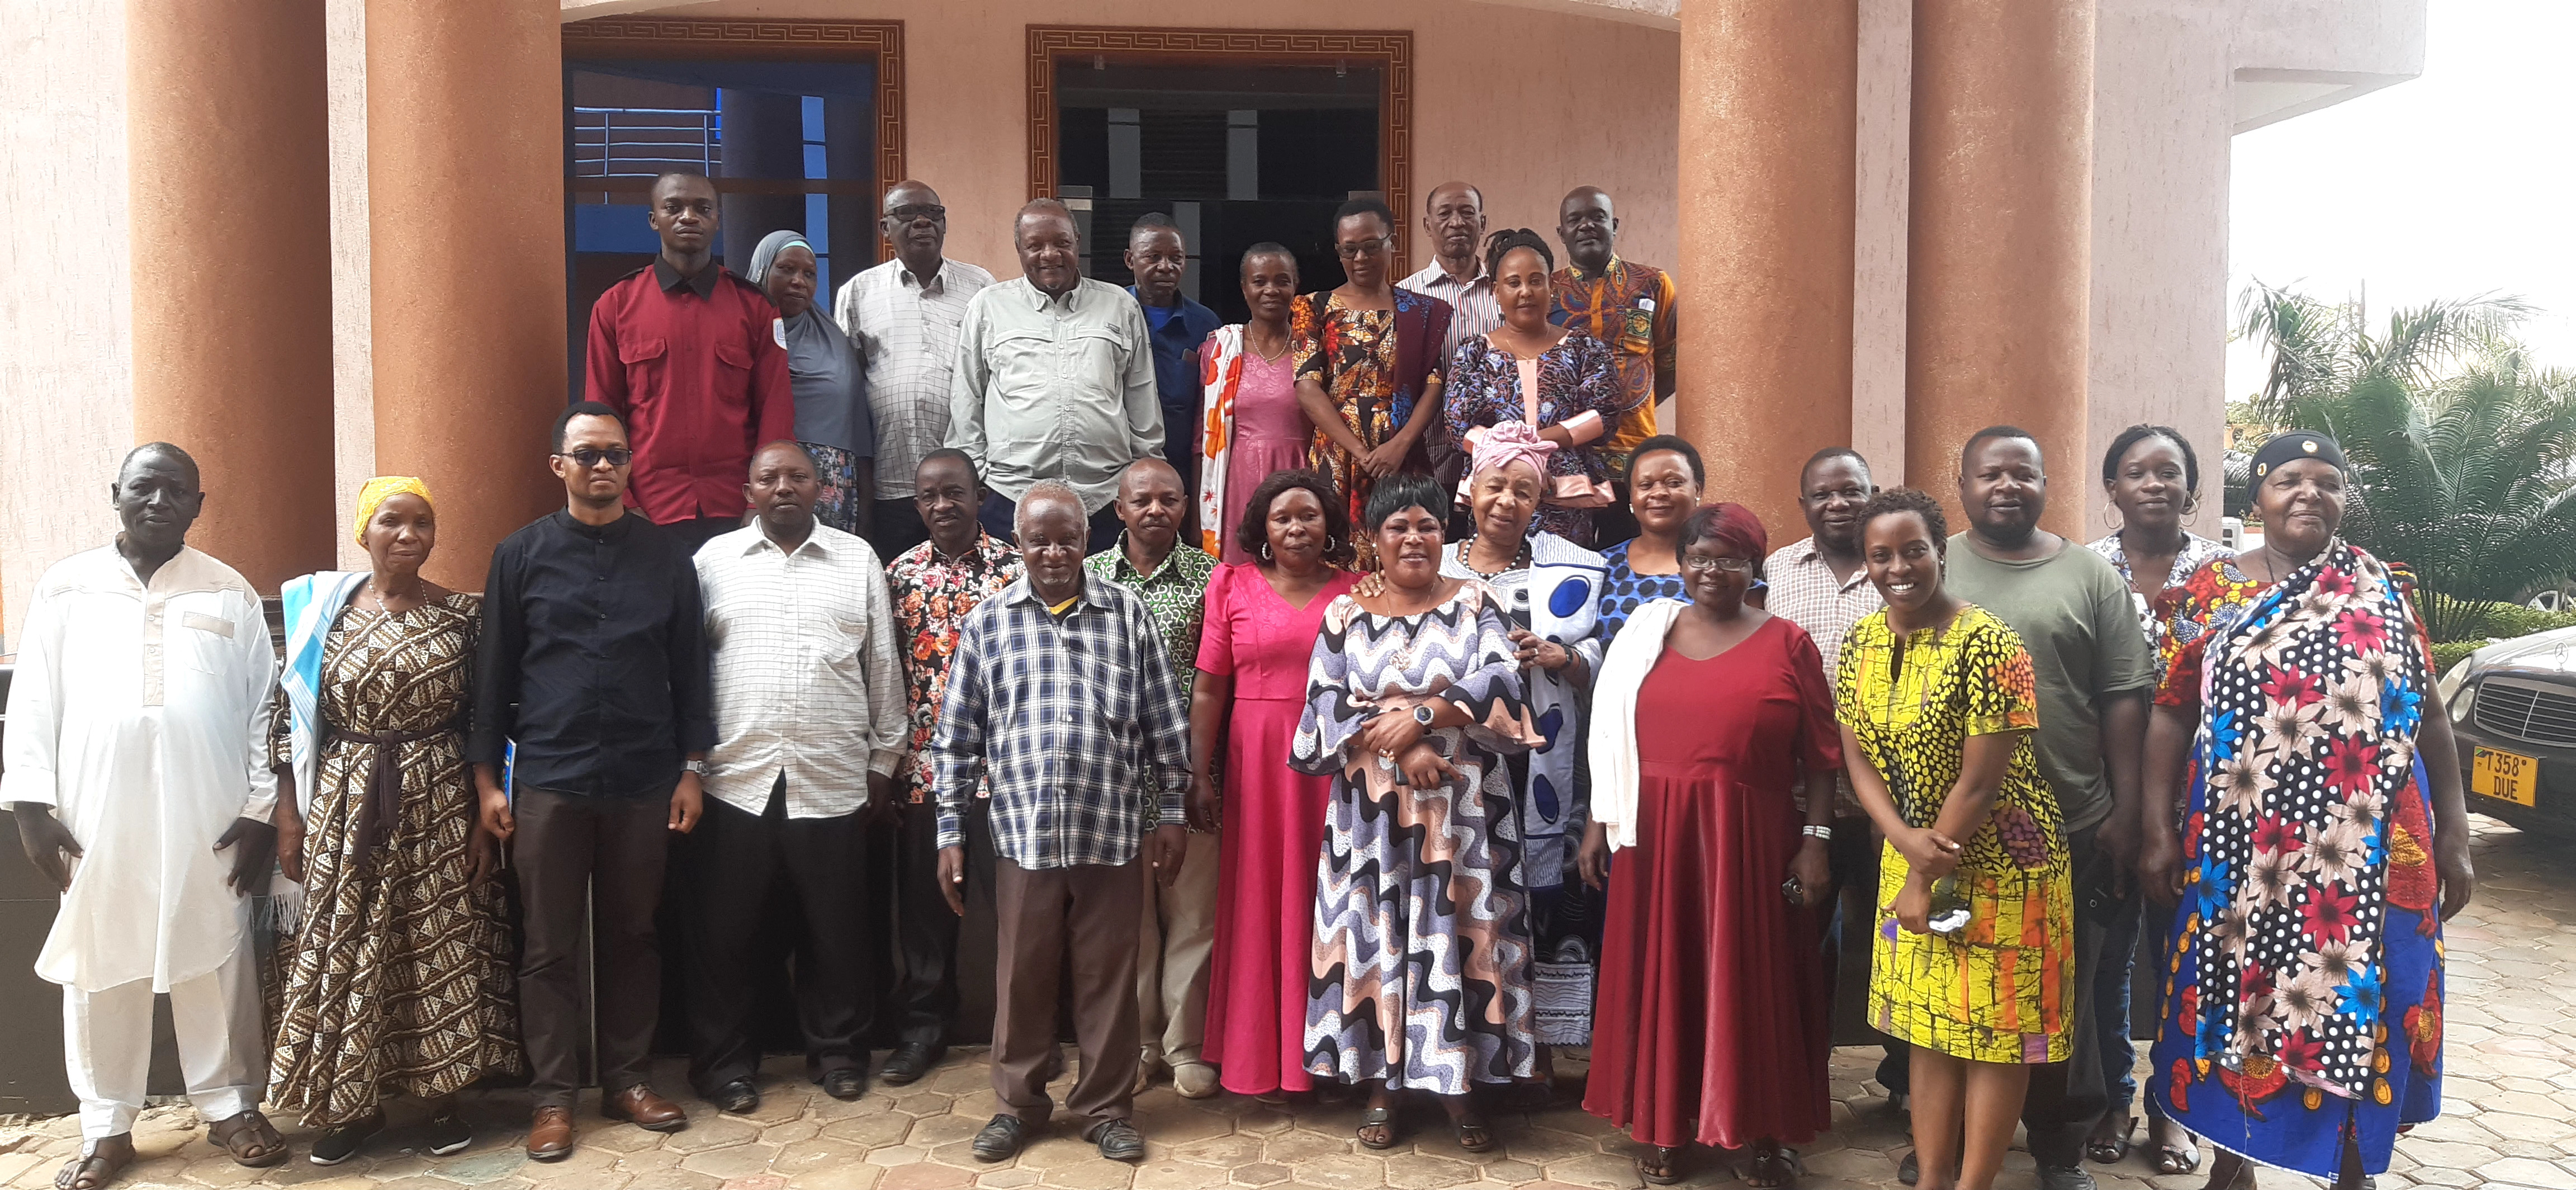 ENGAGEMENT:  Stakeholders discuss challenges of managing diabetes during COVID-19 outbreak